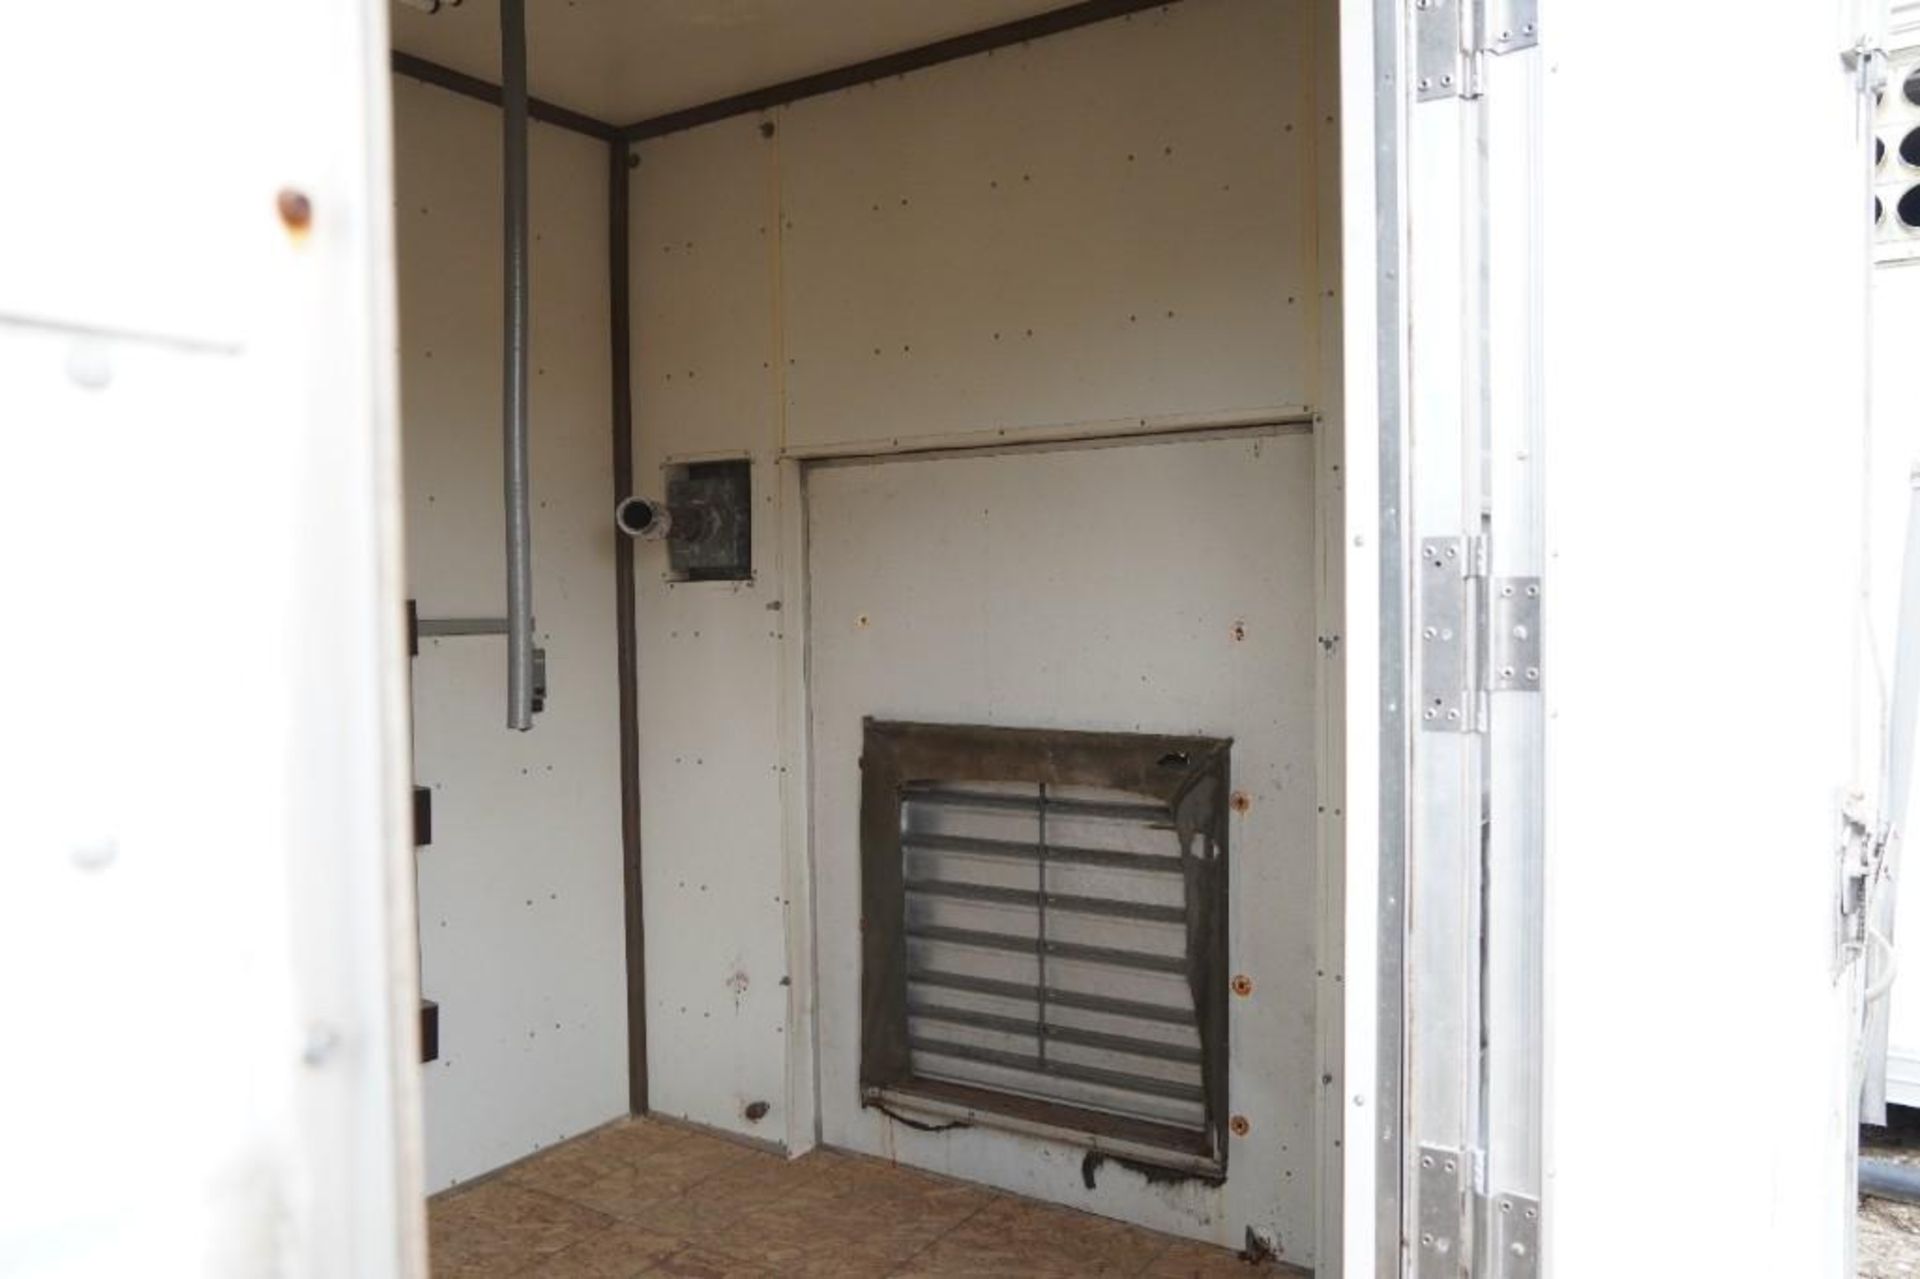 Microvan Mobile International Insulated Aluminum Mobile Building - Image 8 of 16